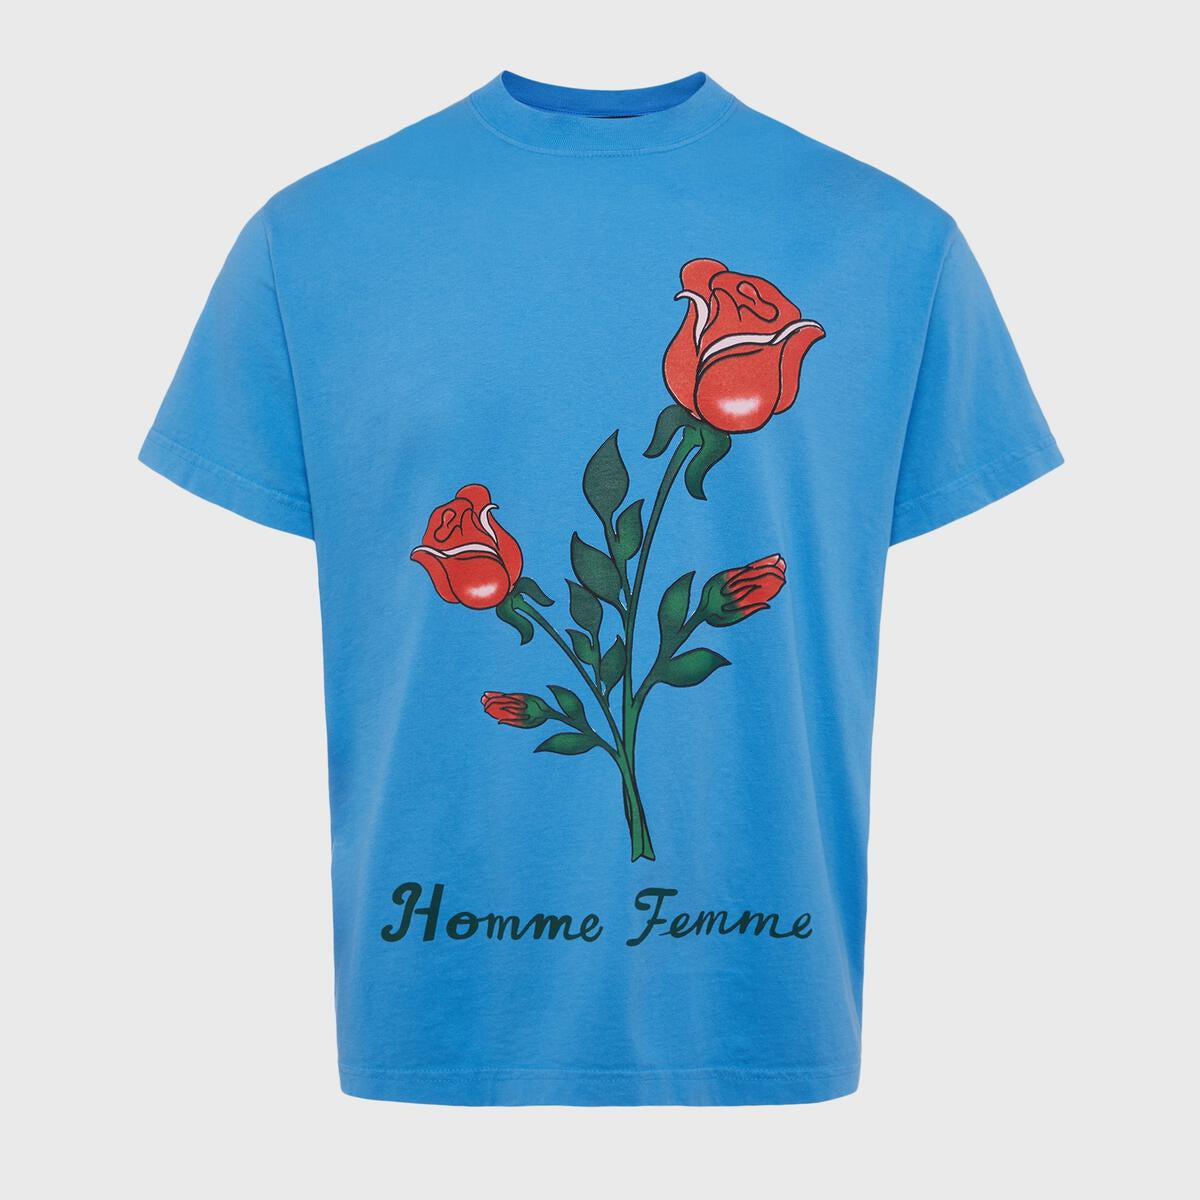 Homme + Femme "Poetry" Blue Tee (HFSS2022131-2)